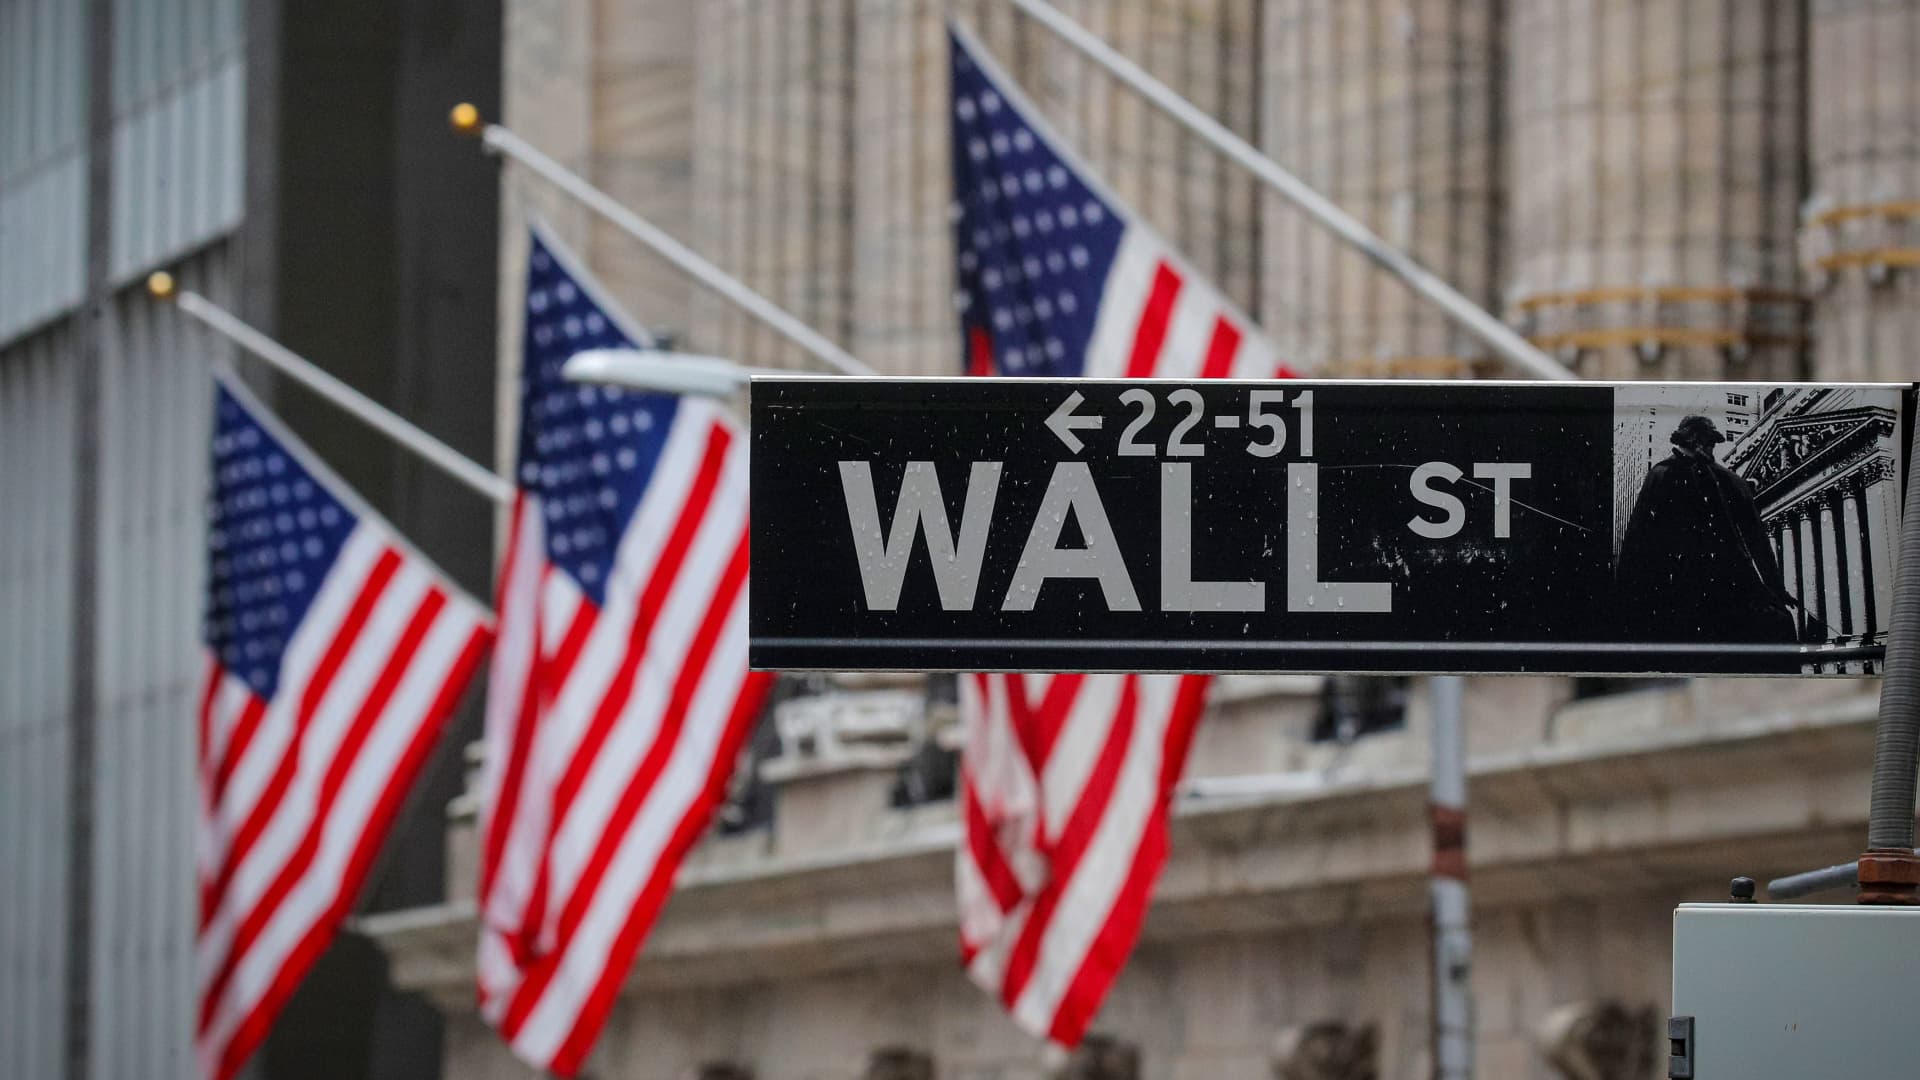 The Wall Street sign is seen outside The New York Stock Exchange (NYSE) in New York, February 16, 2021.